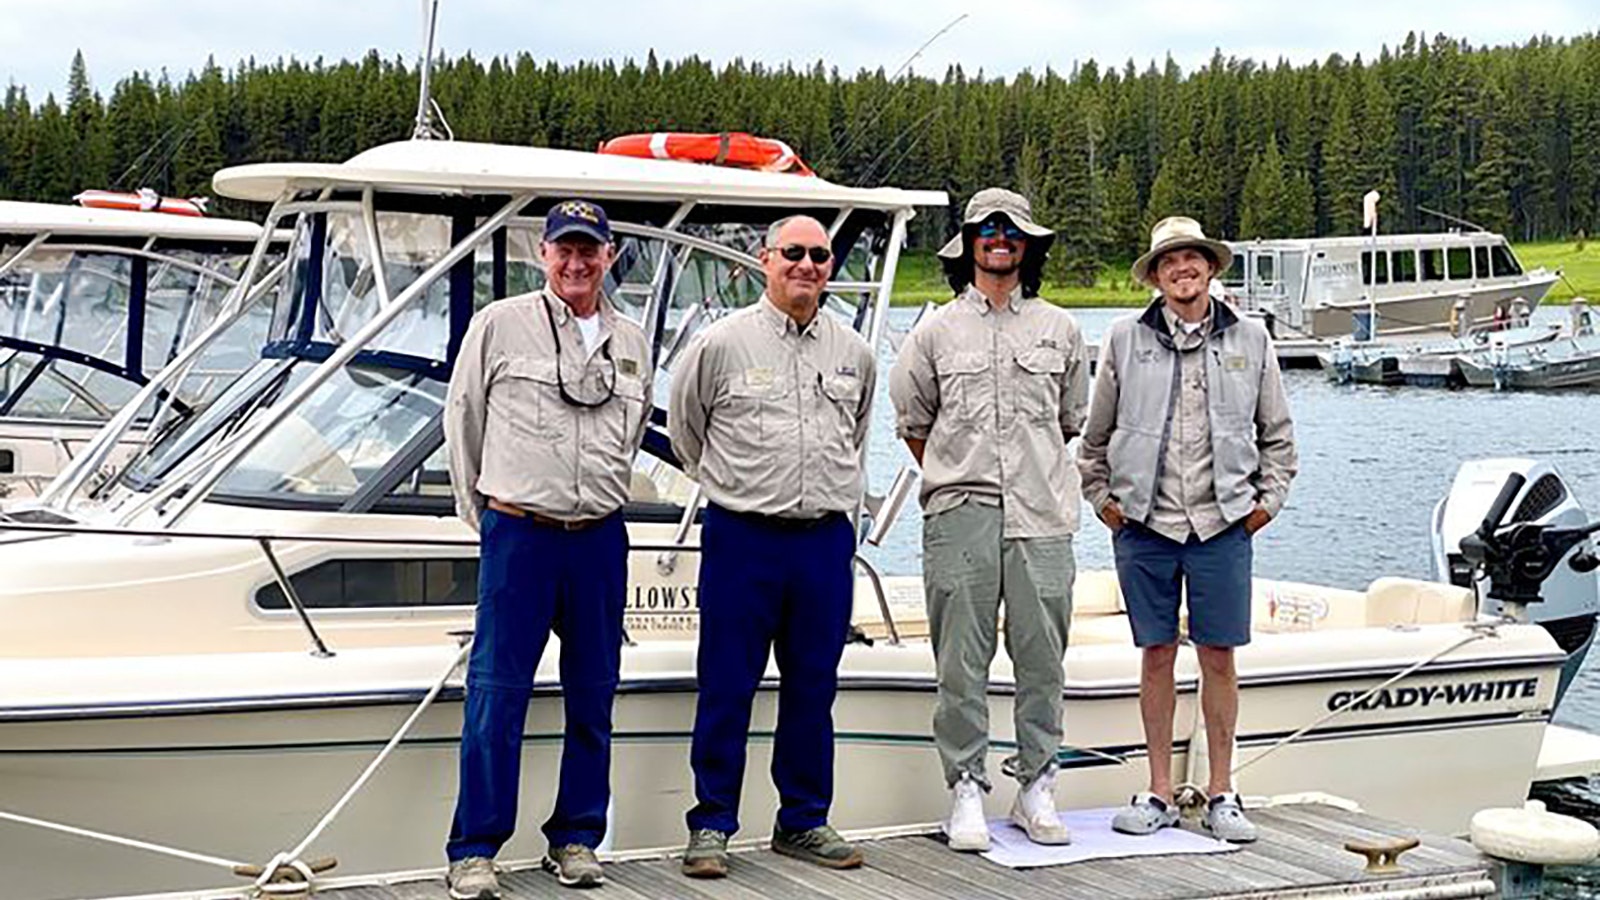 Yellowstone National Park Lodges tour boat employees, from left, Mike Young, Troy Siegel, Elijah Luna and Gregor Woodruff helped rescue a couple and their two small dogs after the man’s kayak capsized in the frigid waters of Yellowstone Lake.